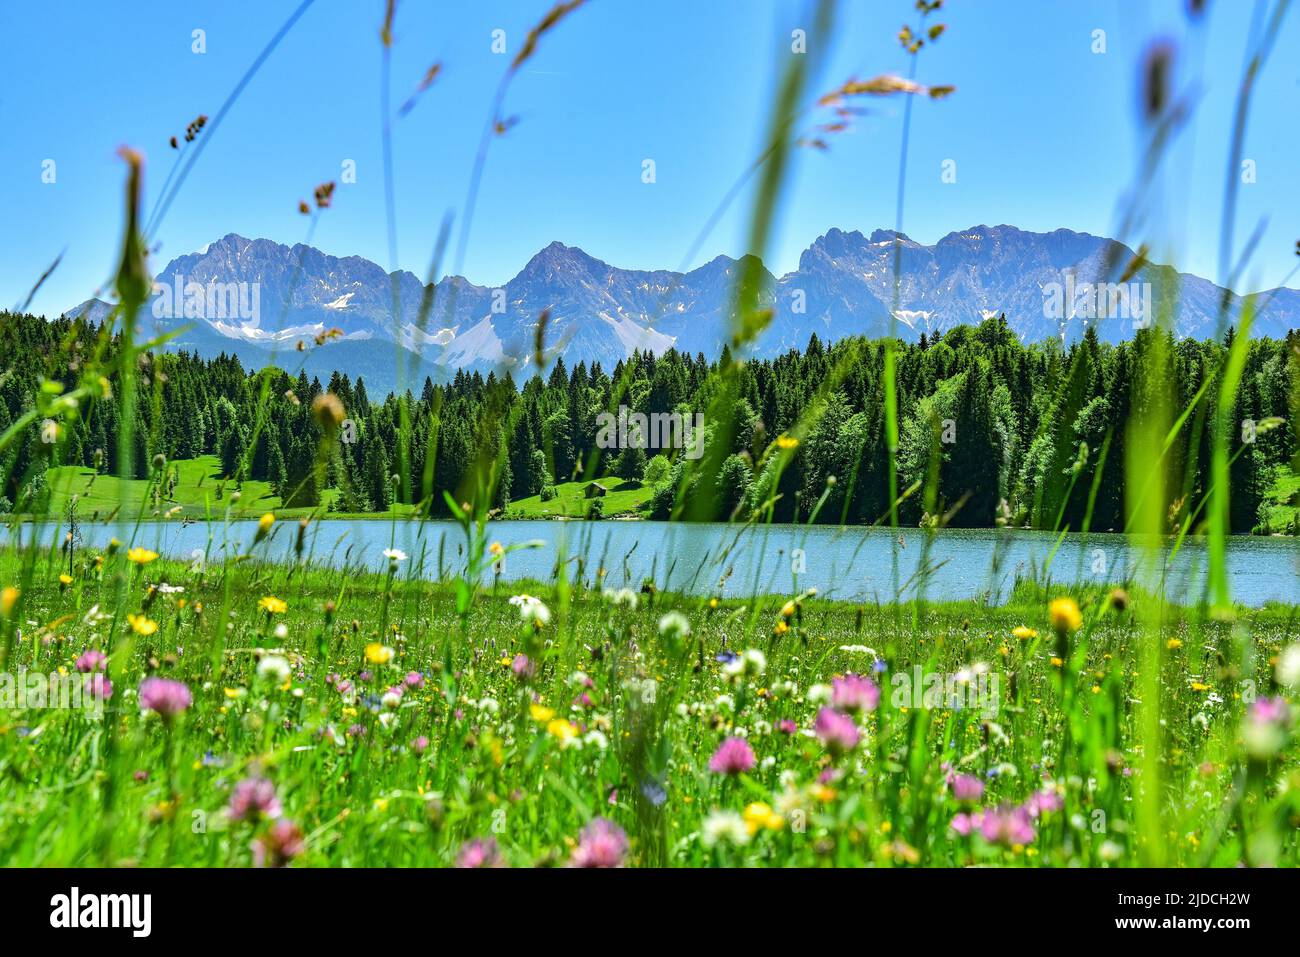 Alpine meadow in summer near Garmisch-Partenkirchen, in the middle distance the Geroldsee, in the background the Karwendel mountains, Bavaria, Germany Stock Photo